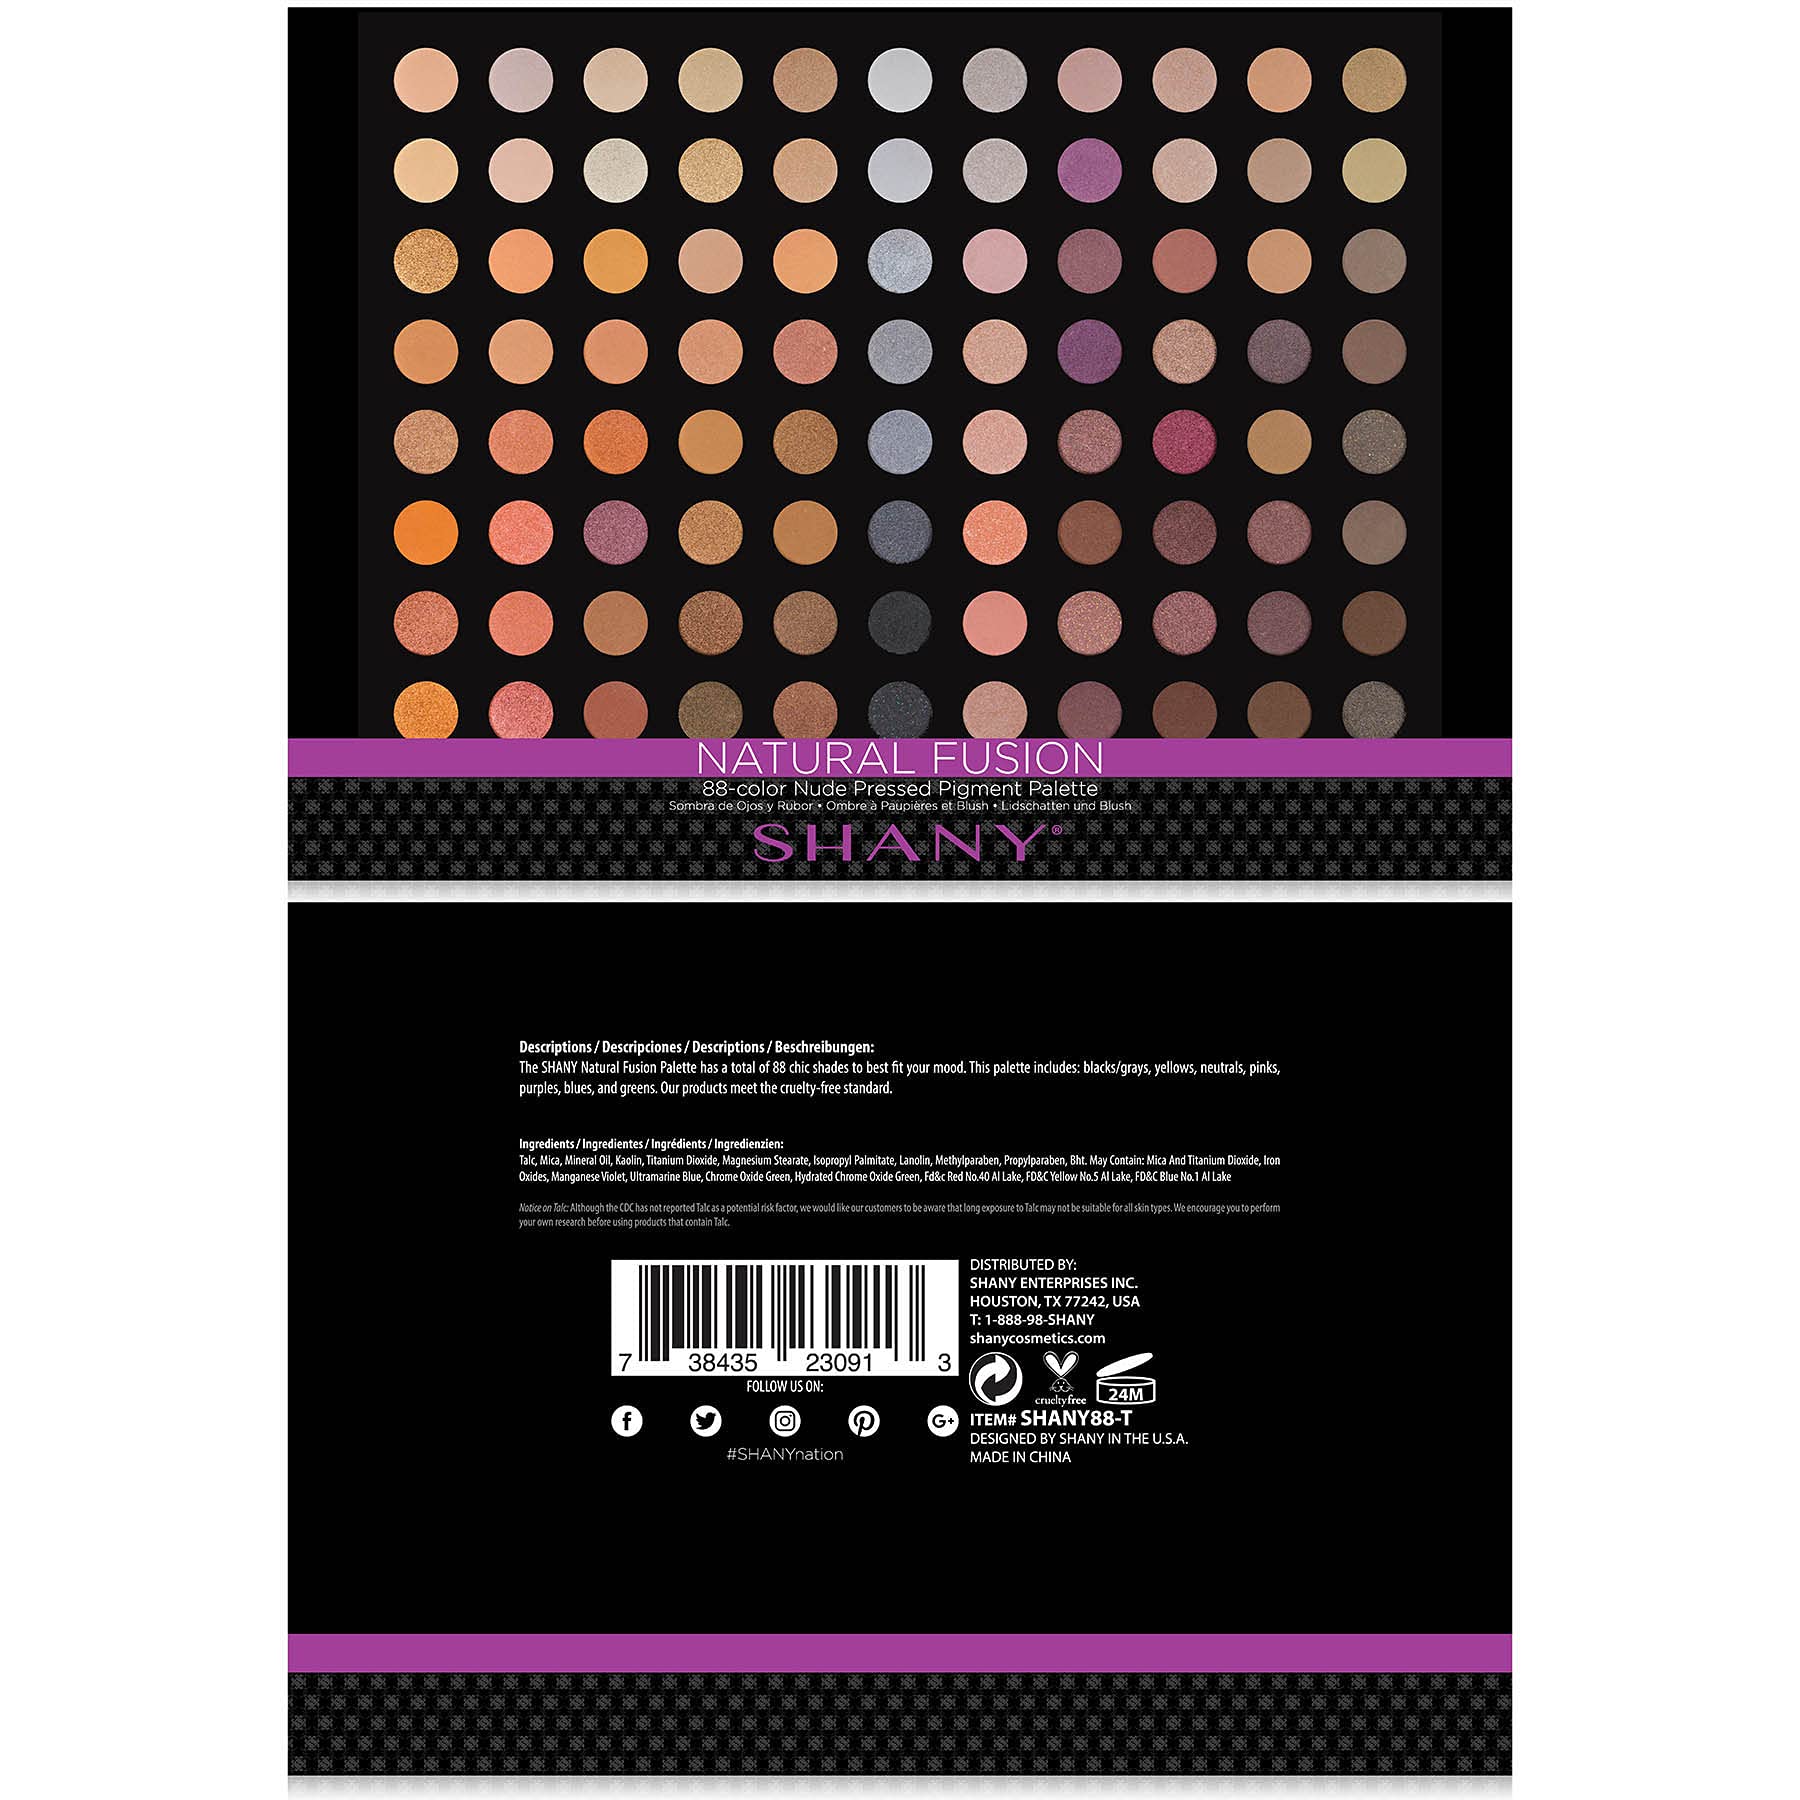 SHANY Natural Fusion Eyeshadow Makeup Palette - 88 Color Highly Pigmented Blendable Natural Color Matte Eye shadow Palette - Nude